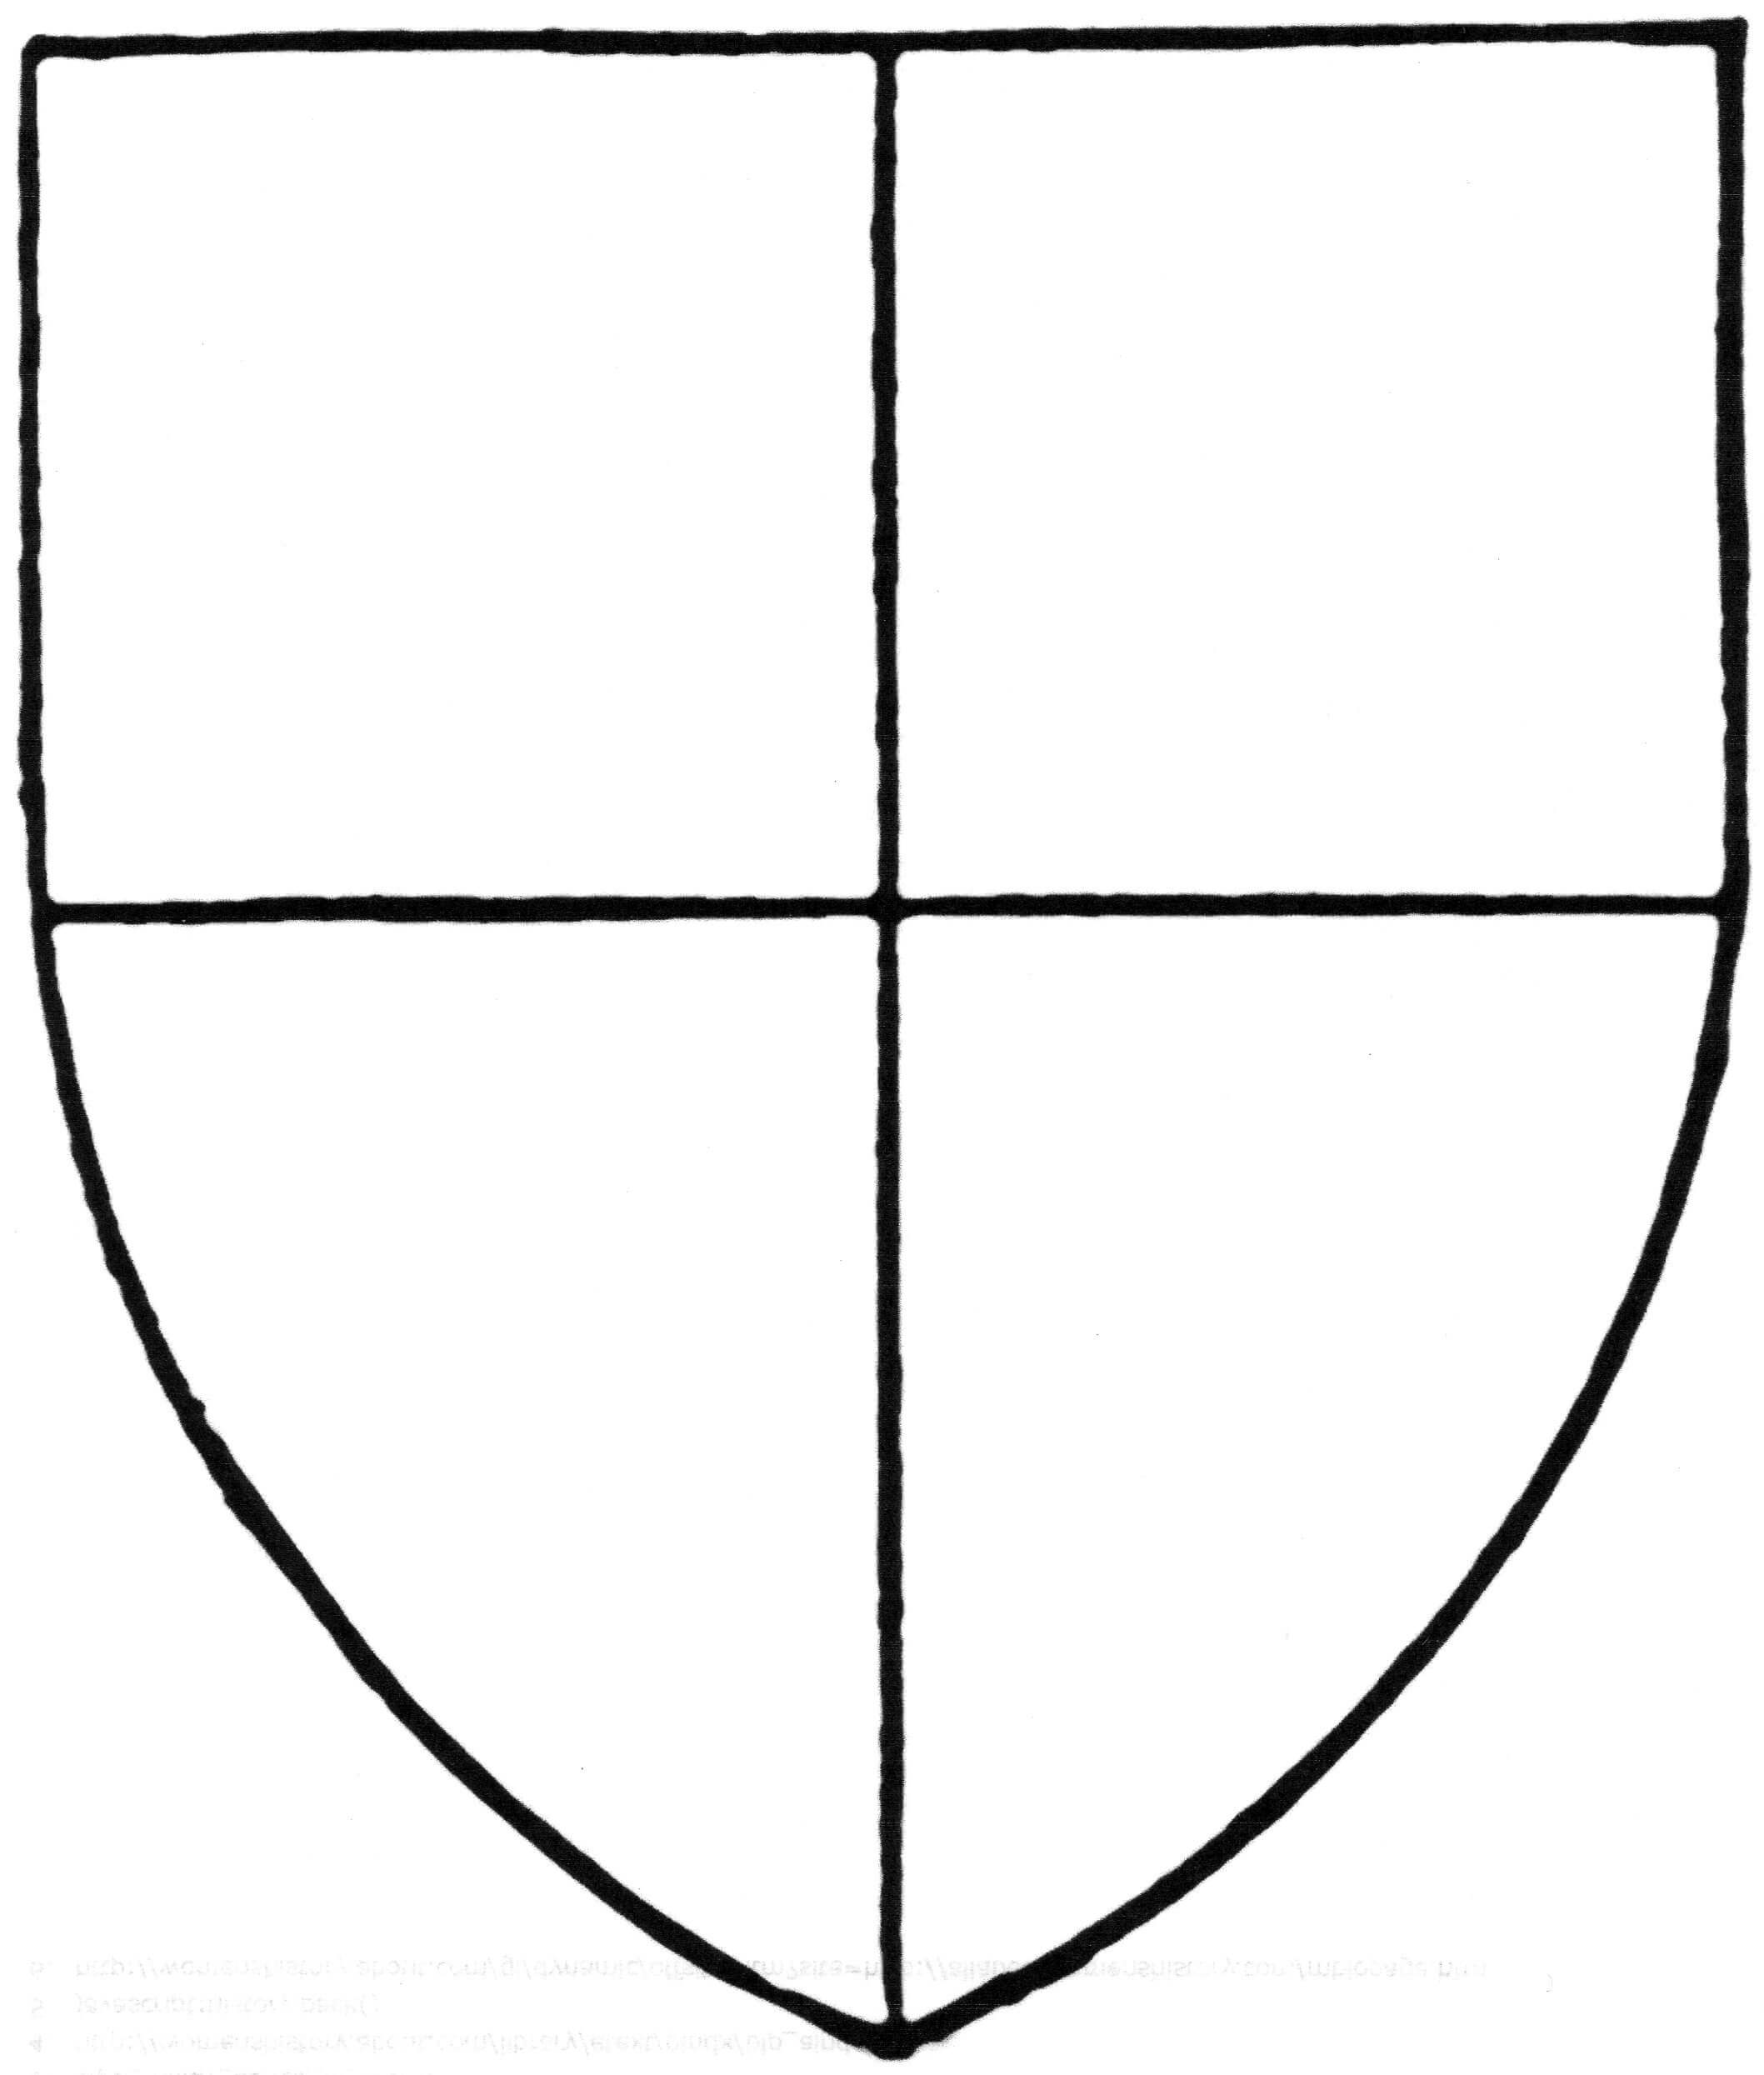 Free Crest Template, Download Free Clip Art, Free Clip Art Throughout Blank Shield Template Printable